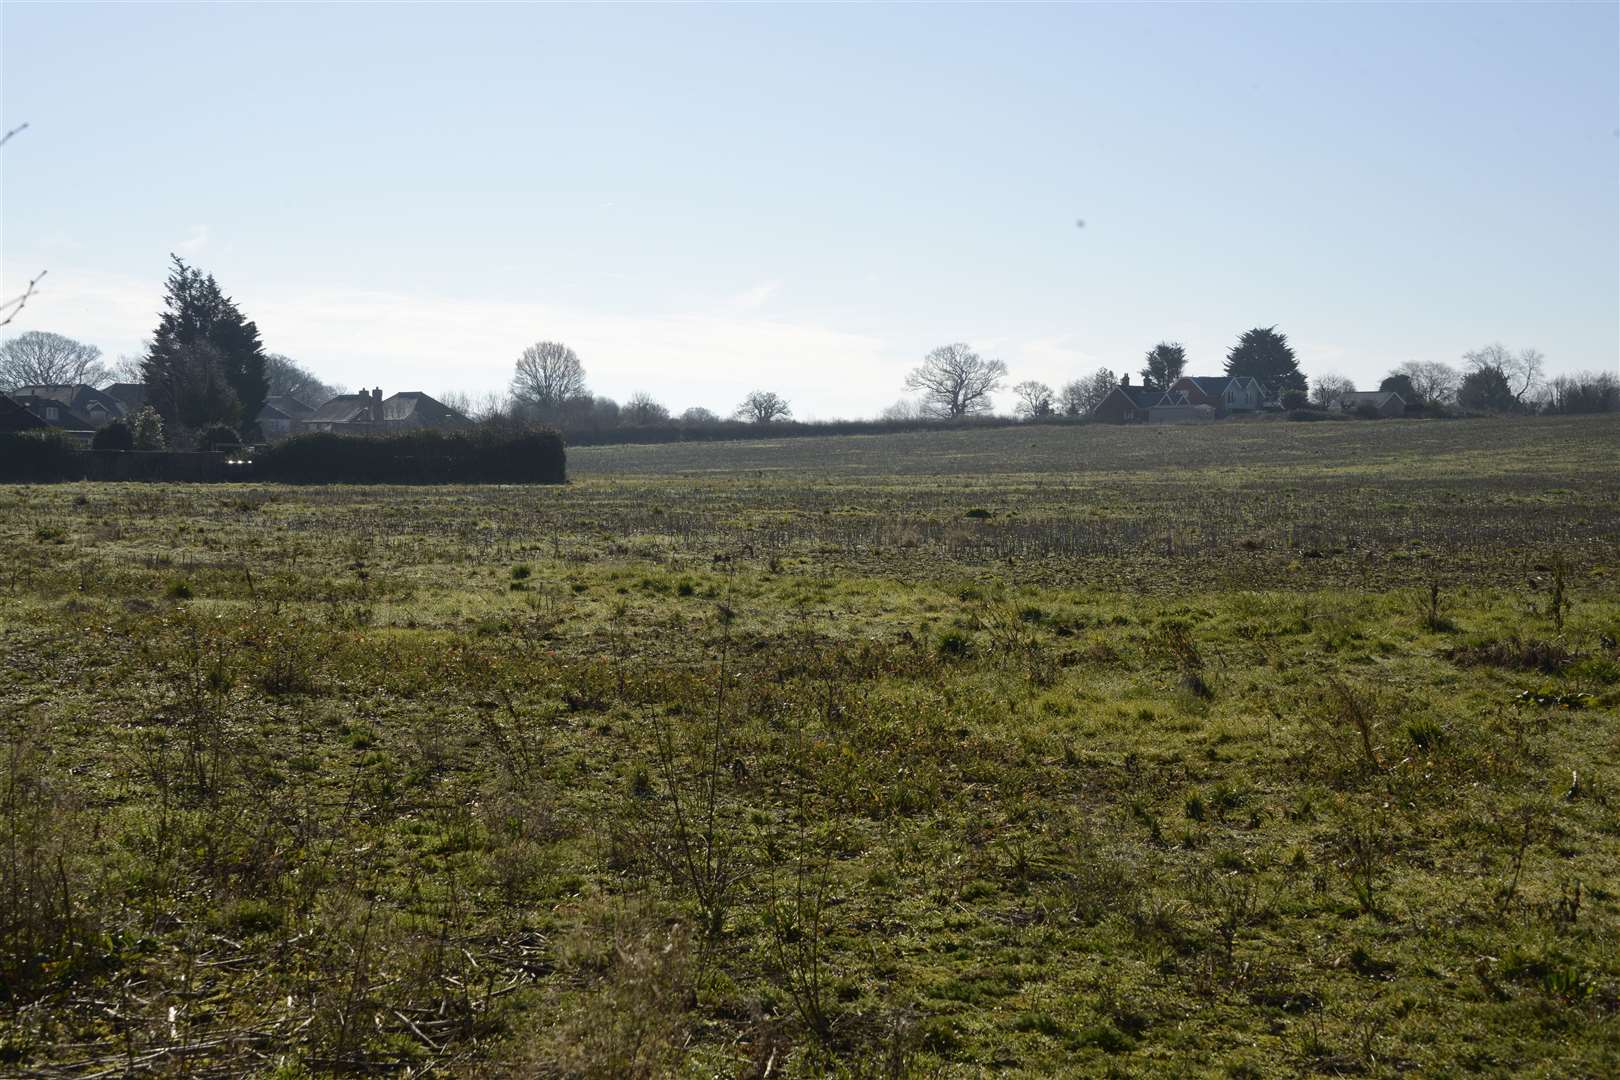 Part of the 126-acre ‘Kingsnorth Green’ site